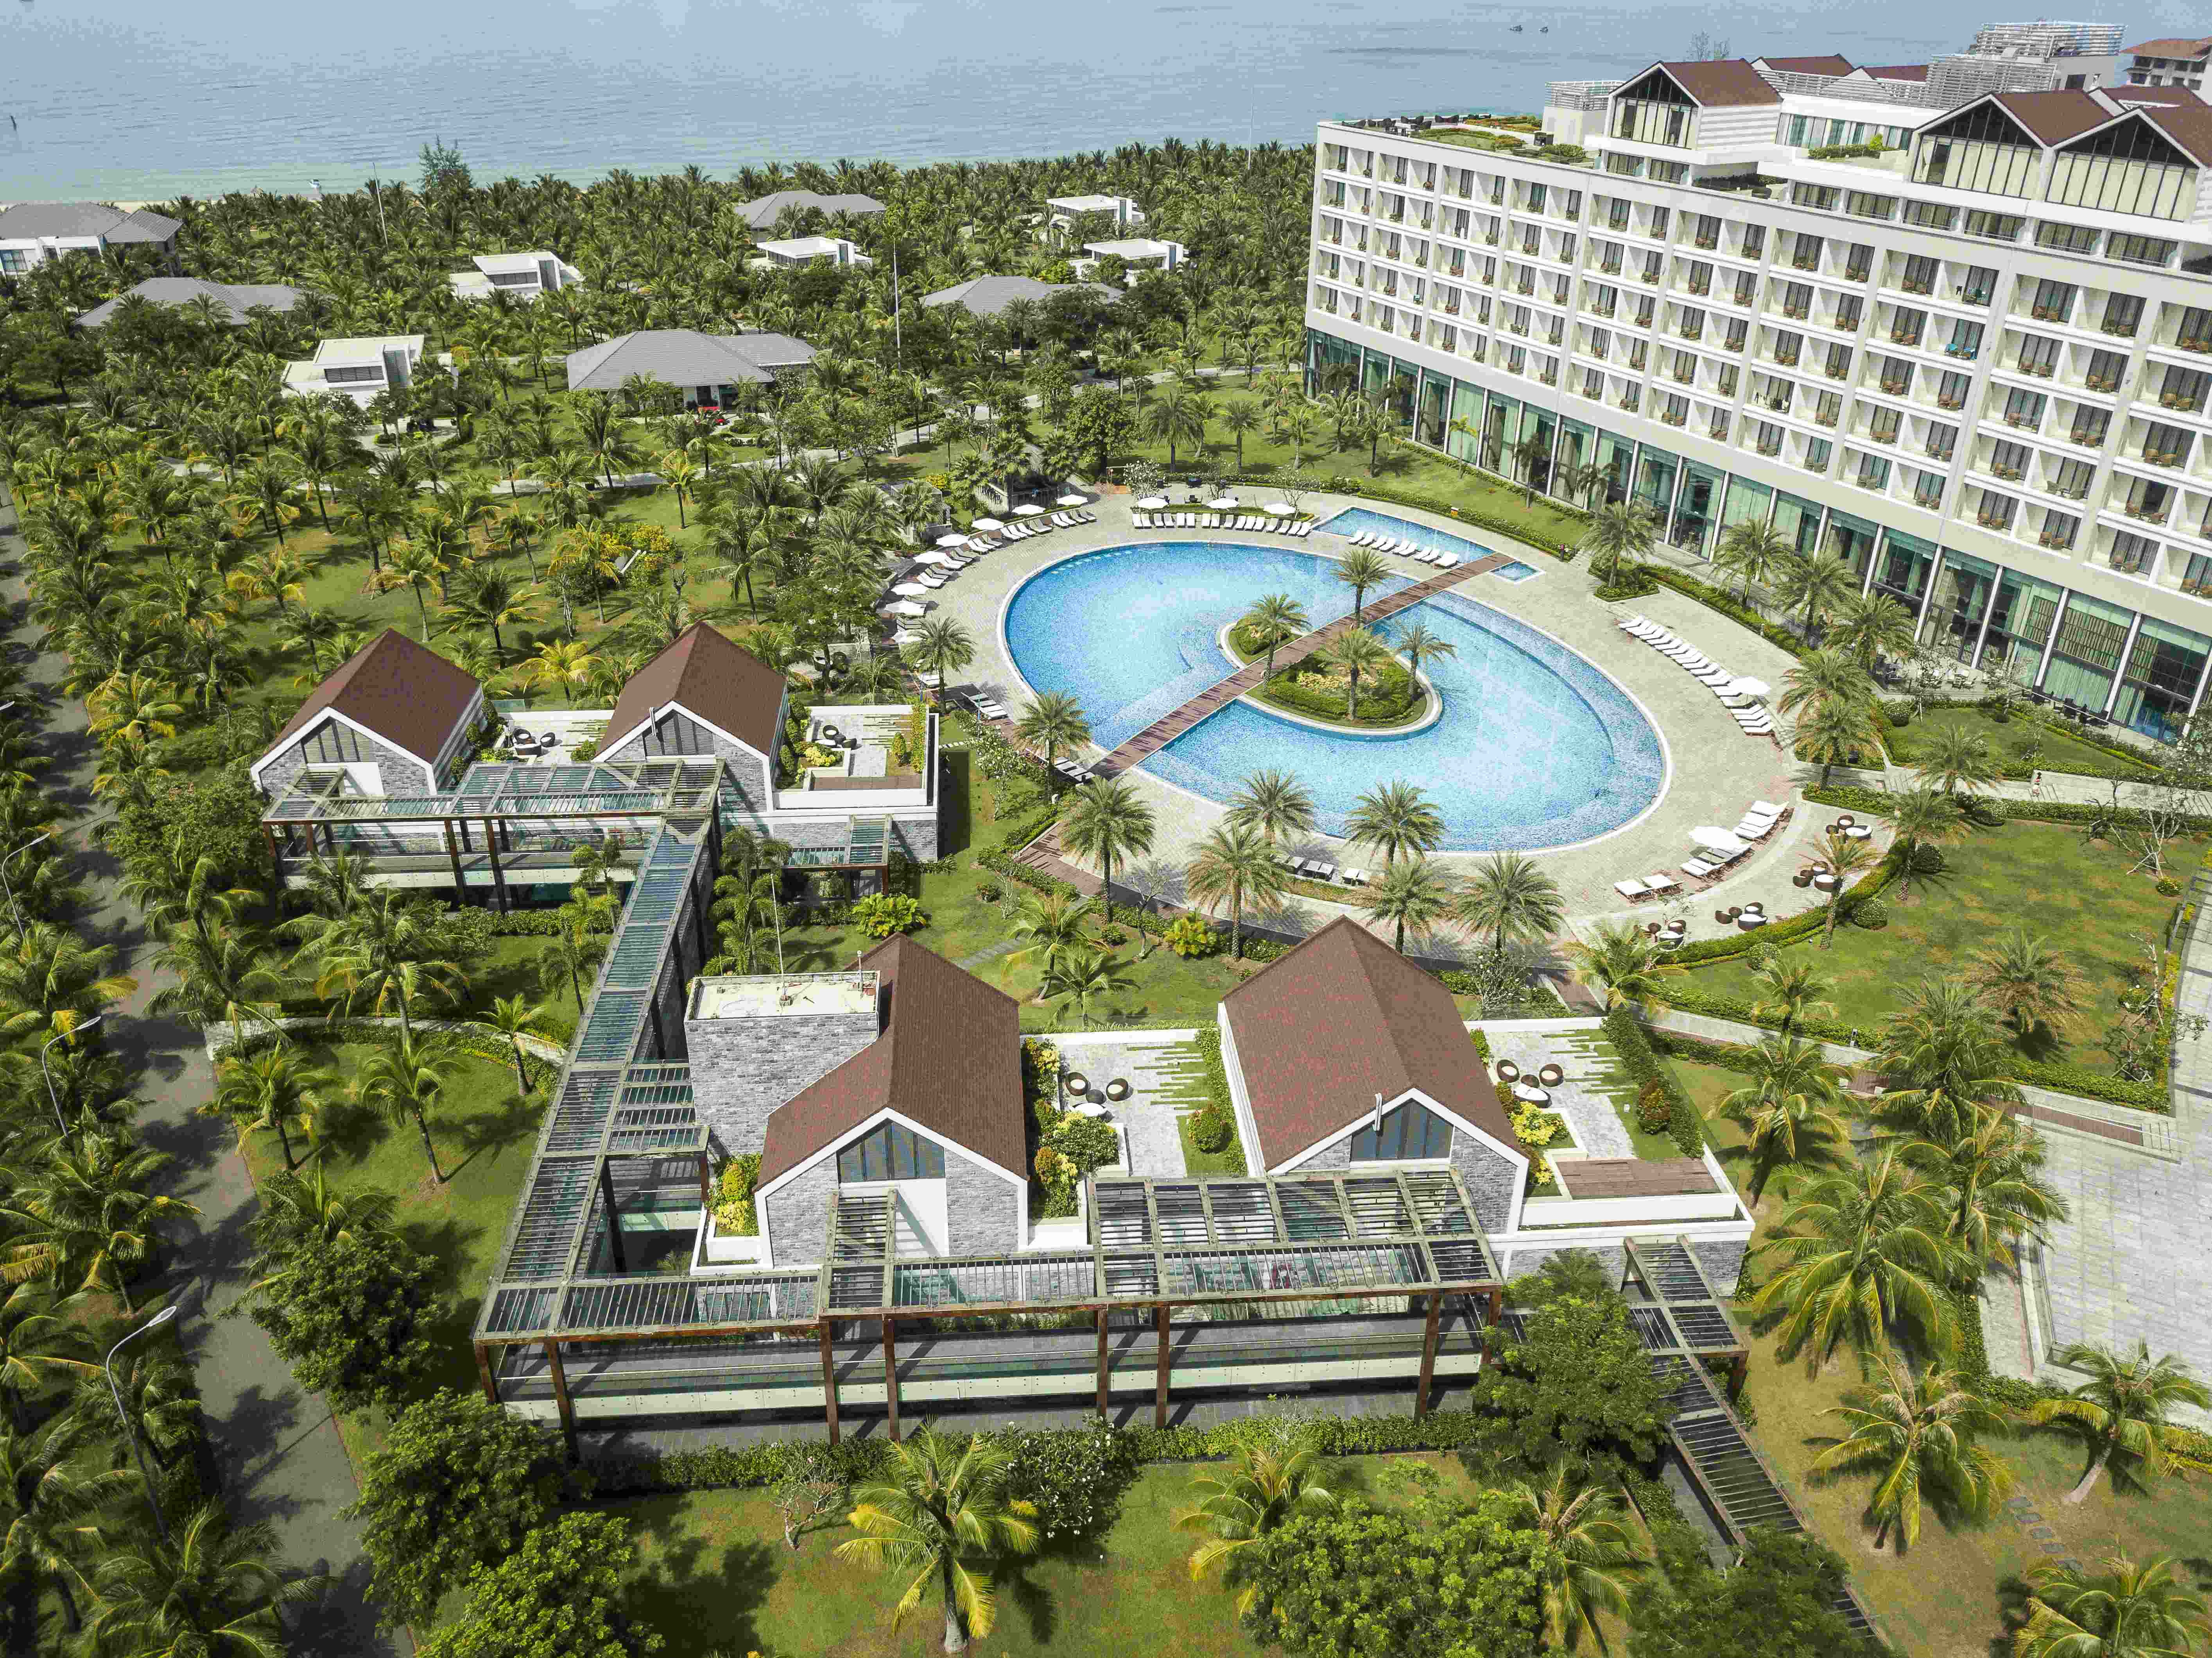 Highlight 3D2N Radisson Blu Phu Quoc 5*: Deluxe Room + Buffet Breakfast + Complimentary daily scheduled roundtrip airport transfers on a shared basis for all bookings (After 31 March 2021)